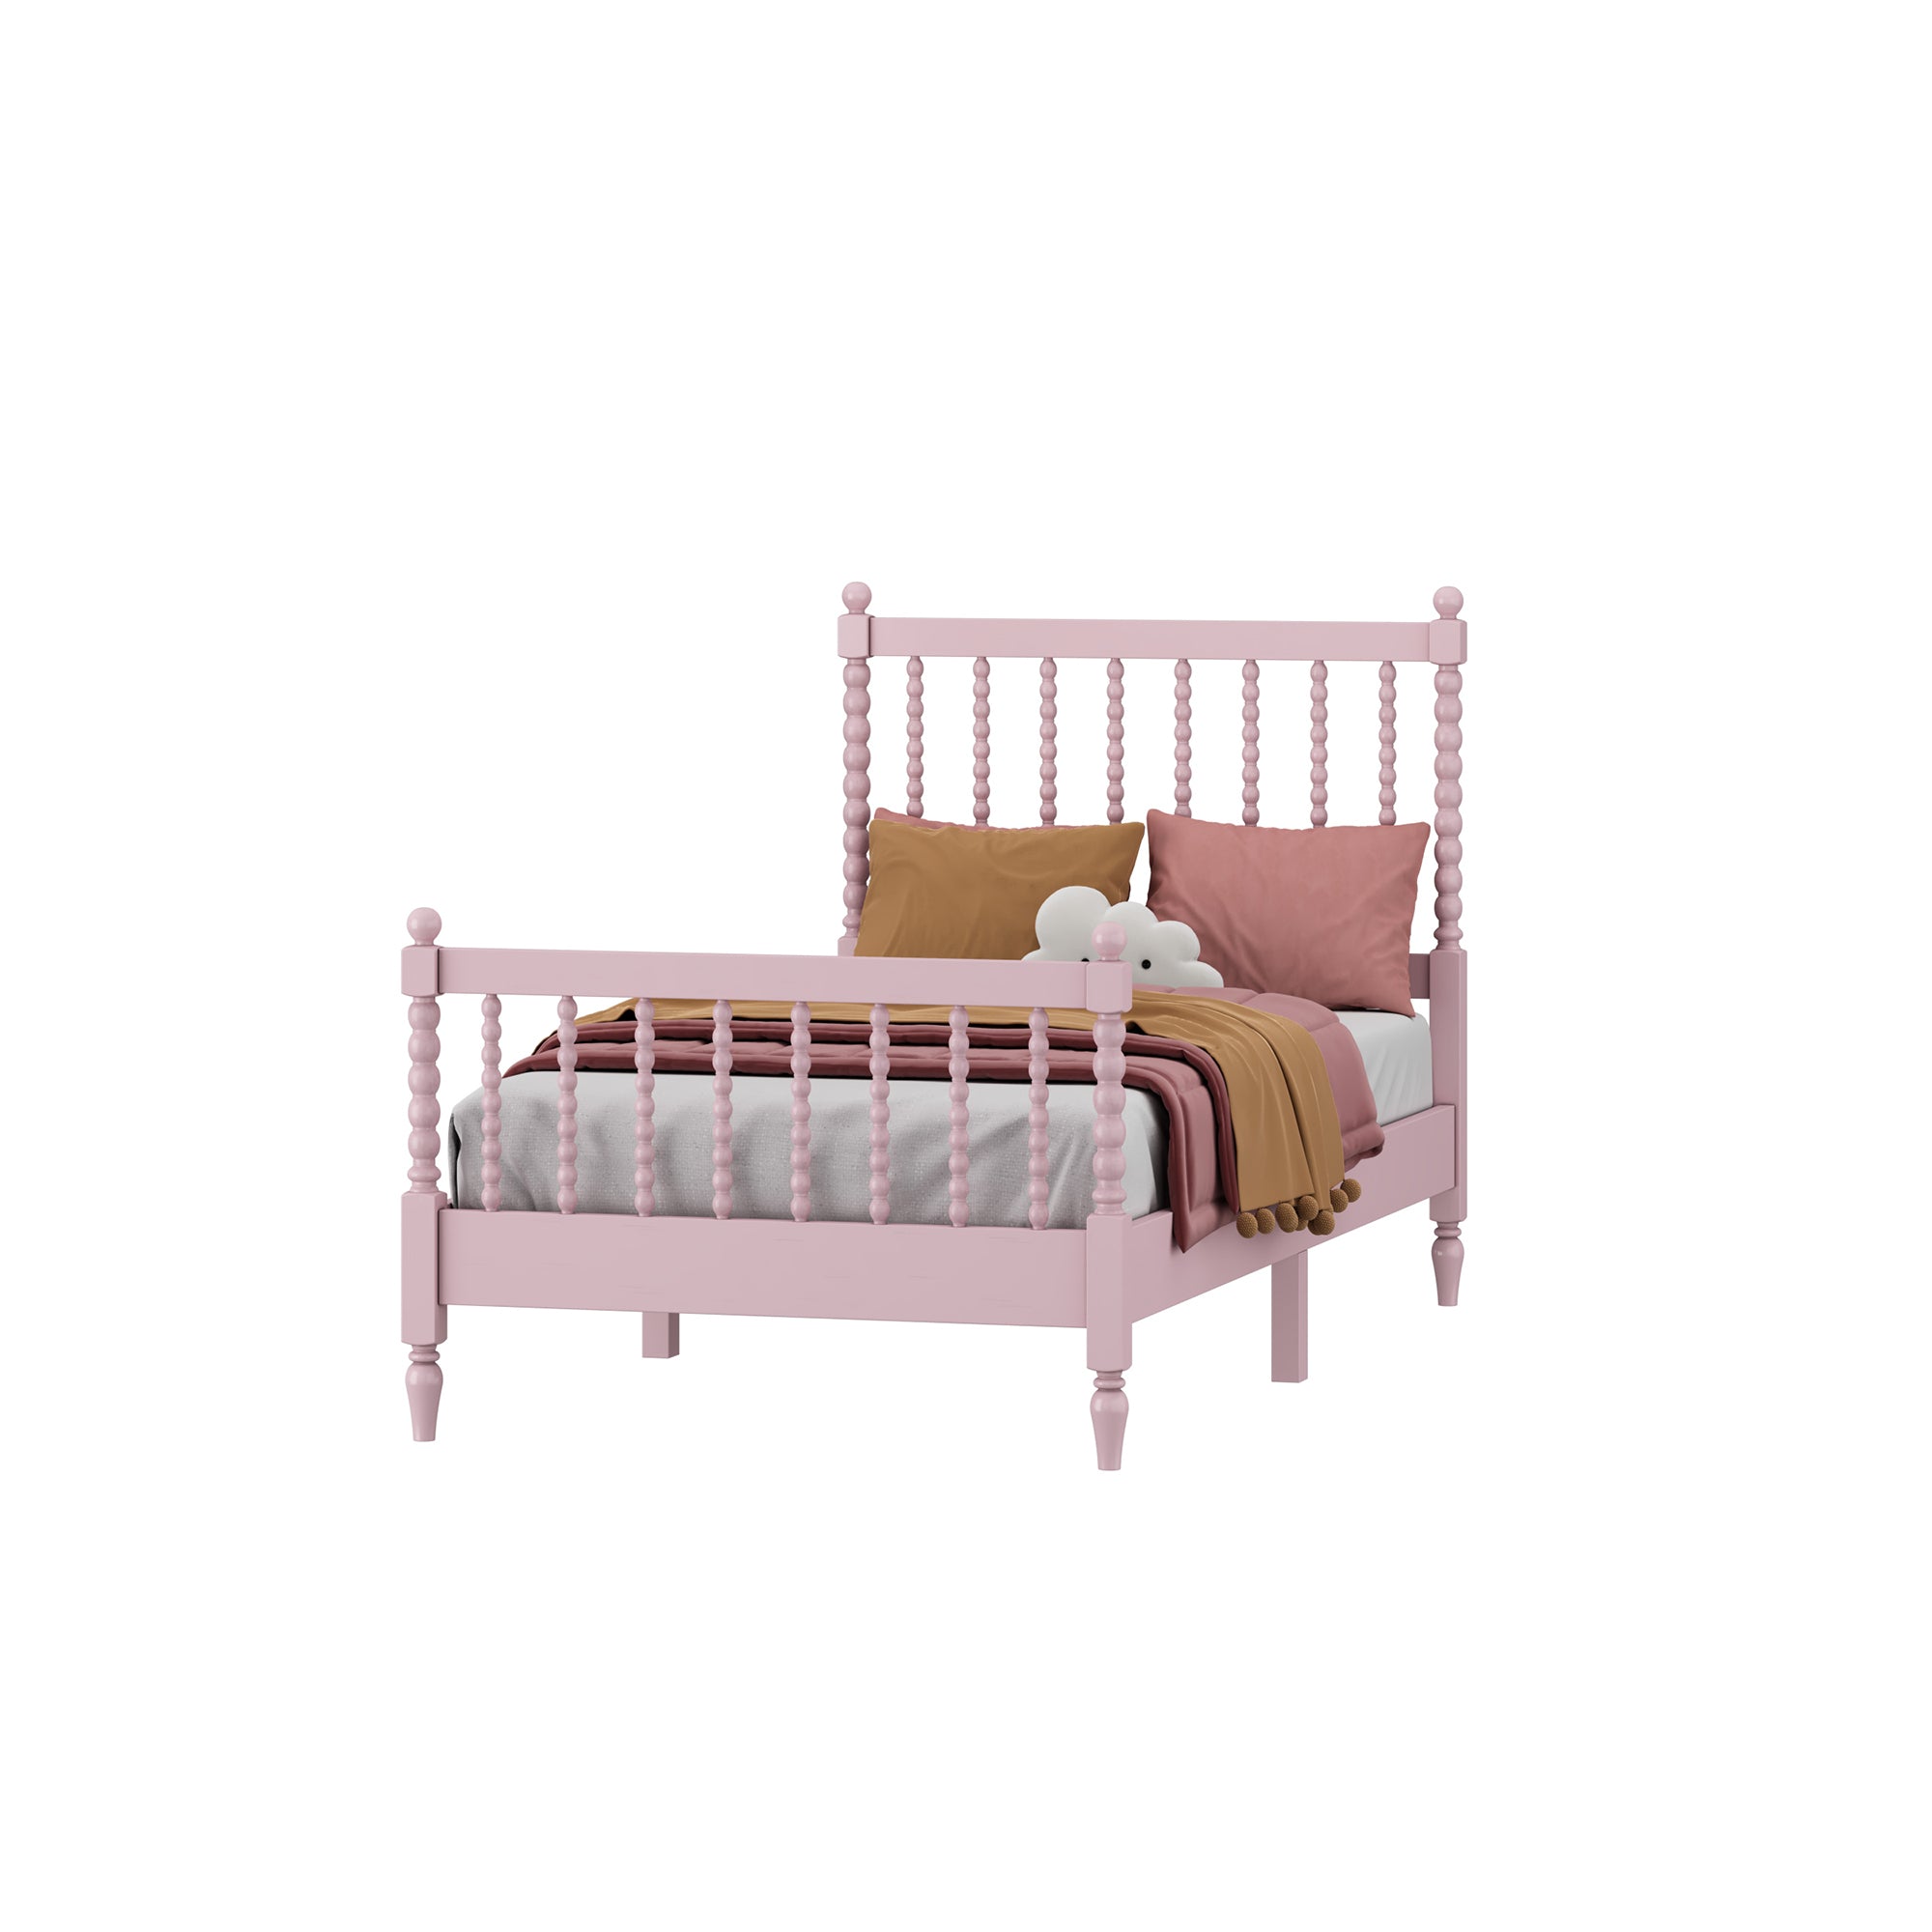 Twin Size Wood Platform Bed with Gourd Shaped pink-wood